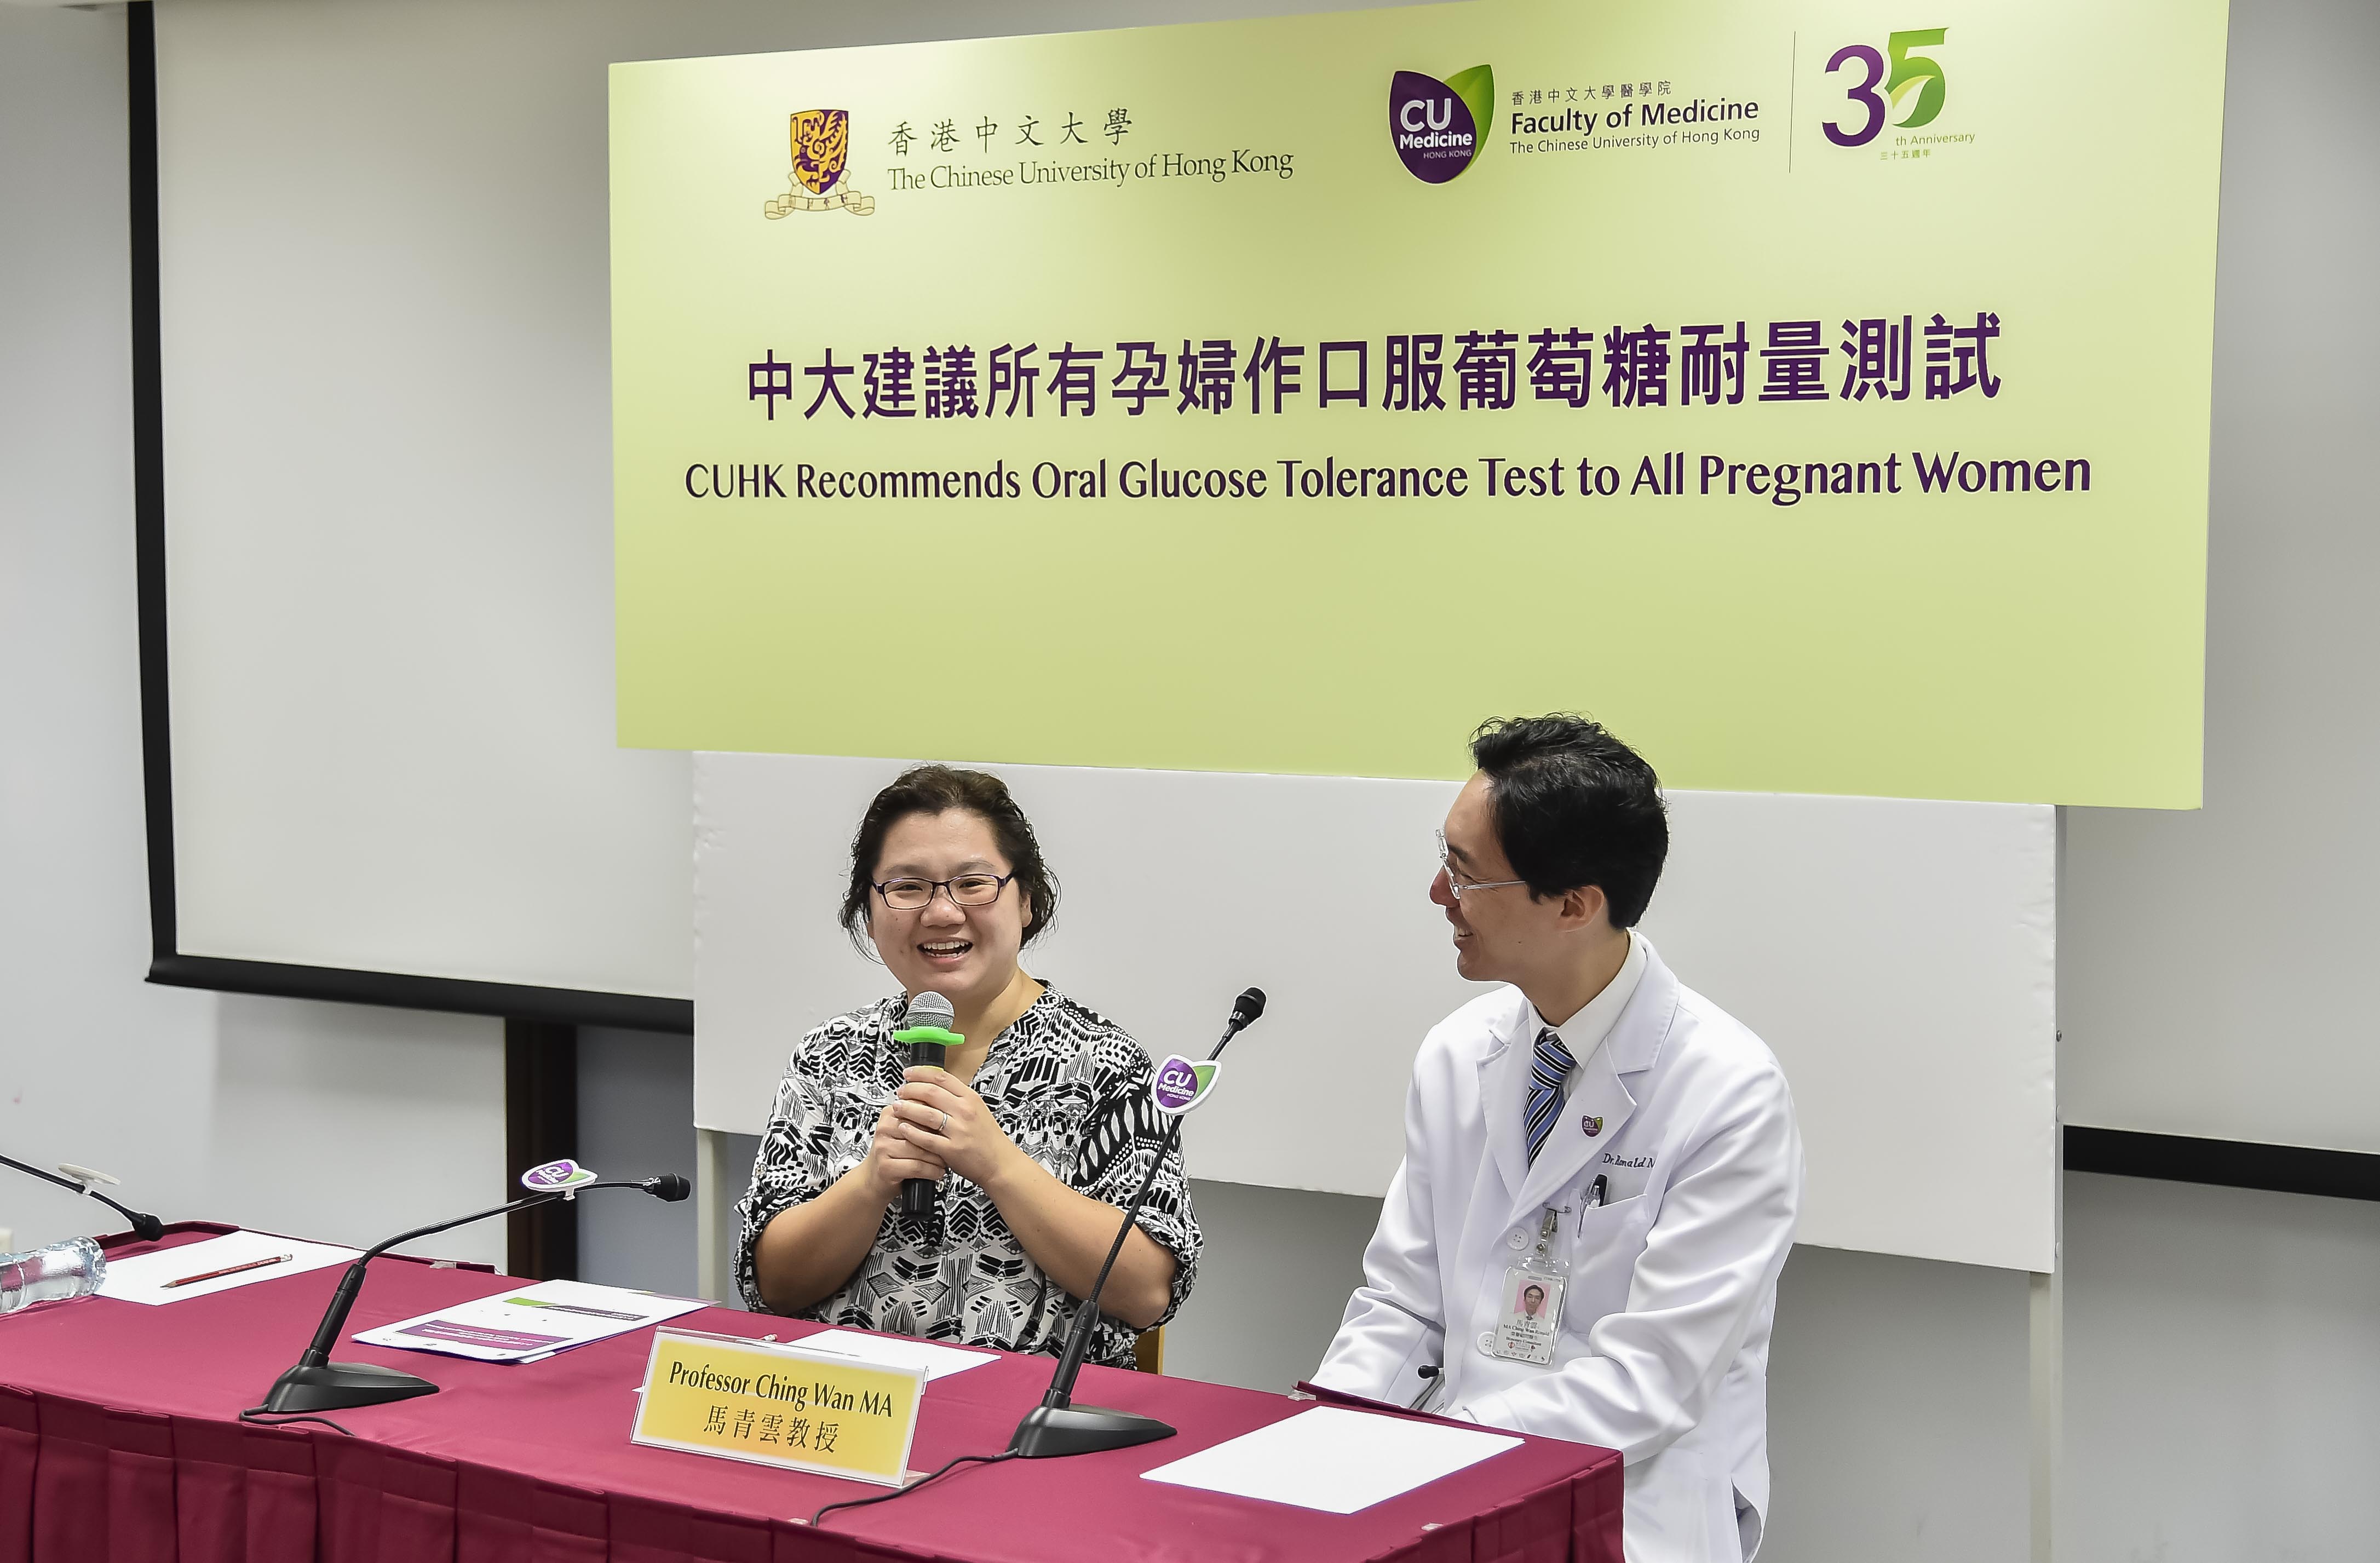 Madam LUI, whose mother is a diabetes patient, was diagnosed with GDM through oral glucose tolerance test in all three pregnancies. Her blood glucose level was under control after diet modification and her children are all healthy with normal weight.